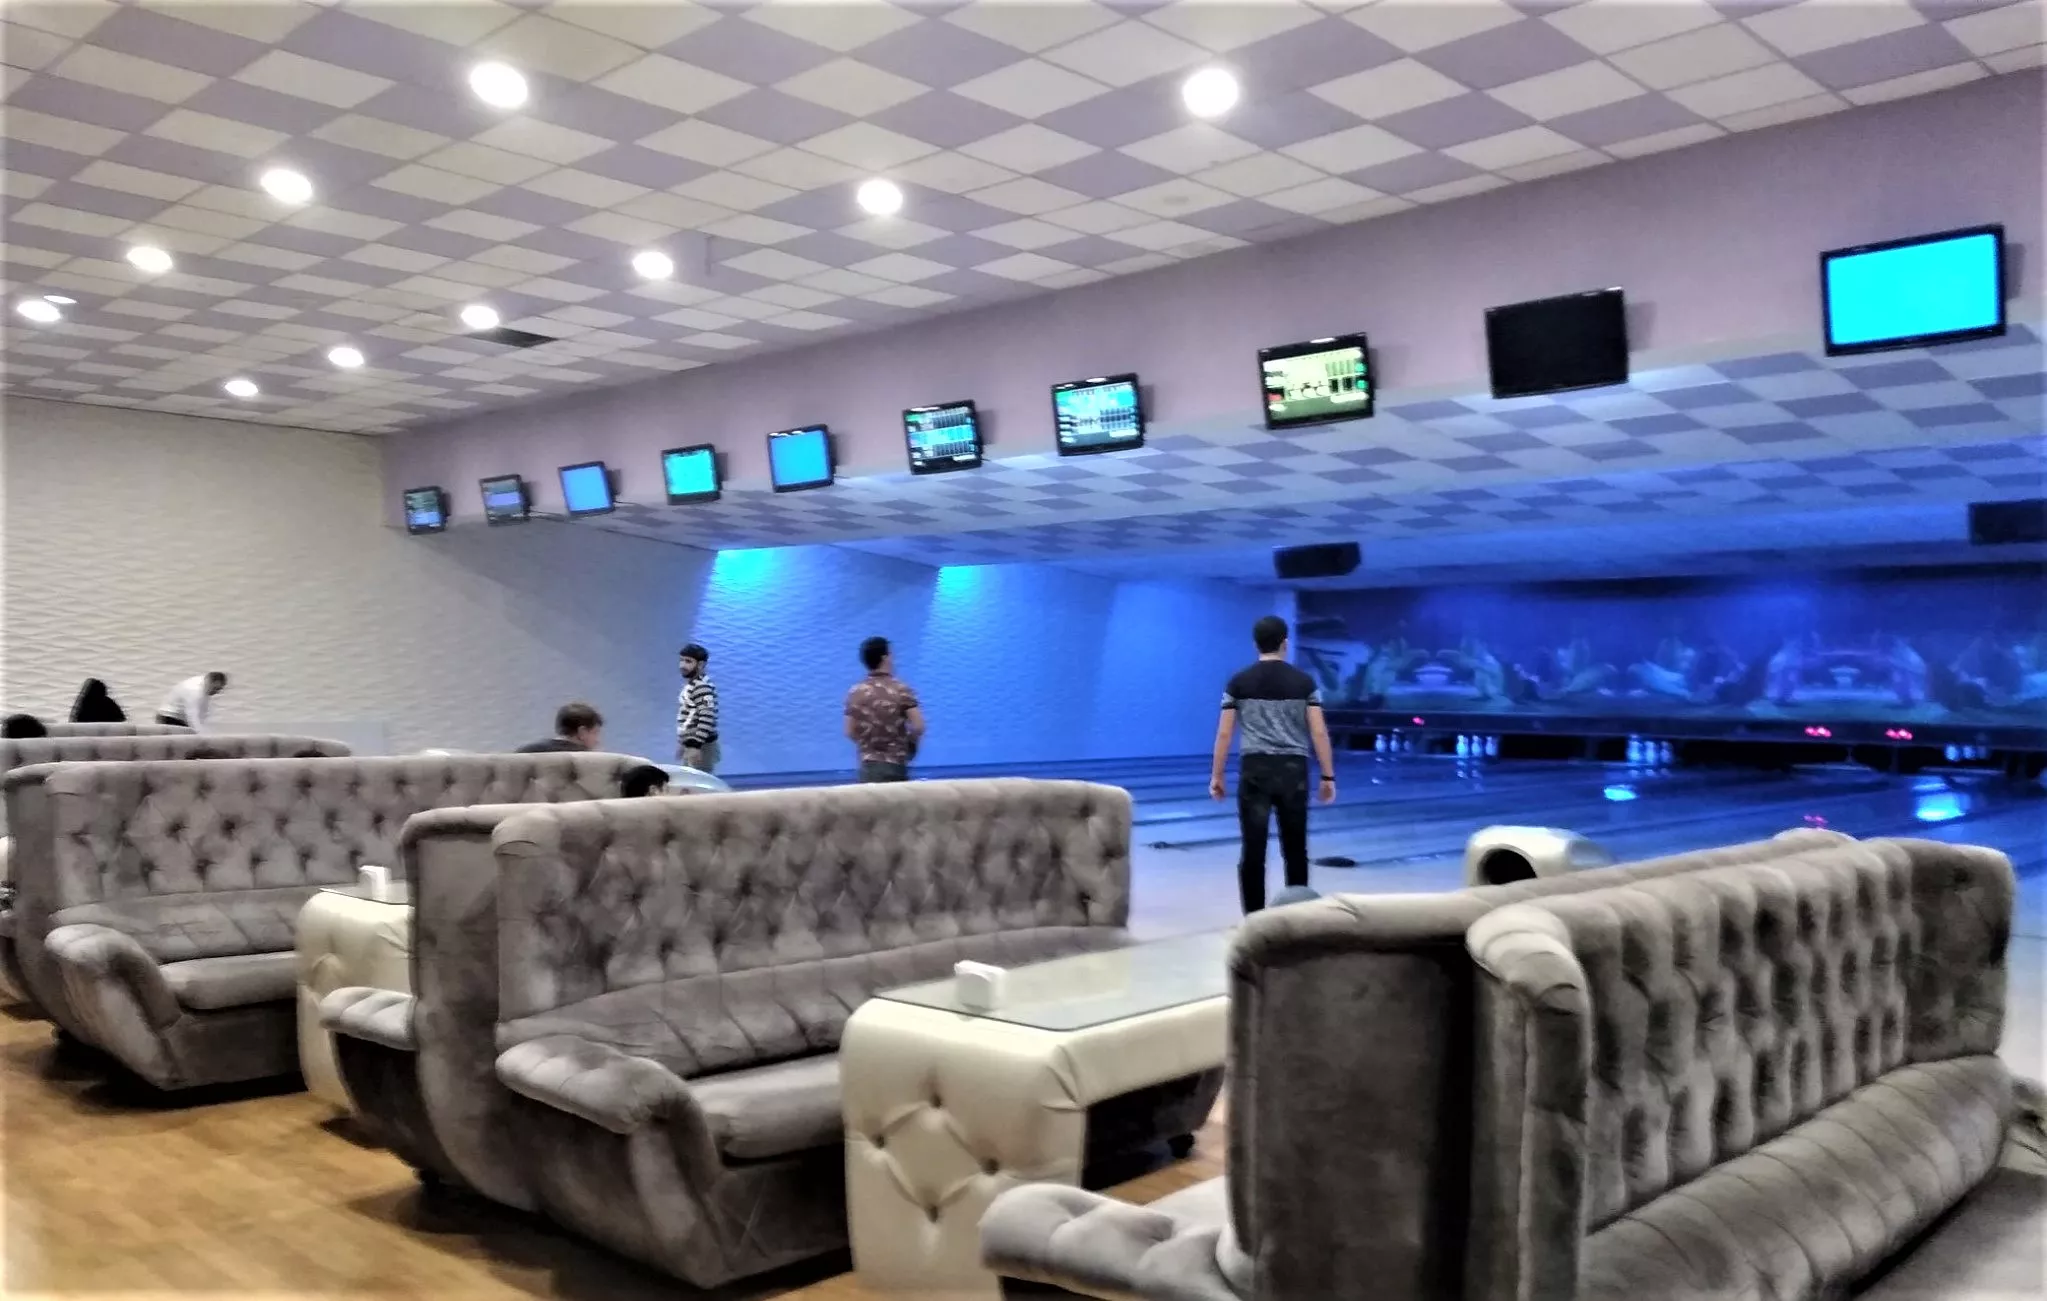 Bowling Elite in Azerbaijan, Middle East | Bowling - Rated 0.9